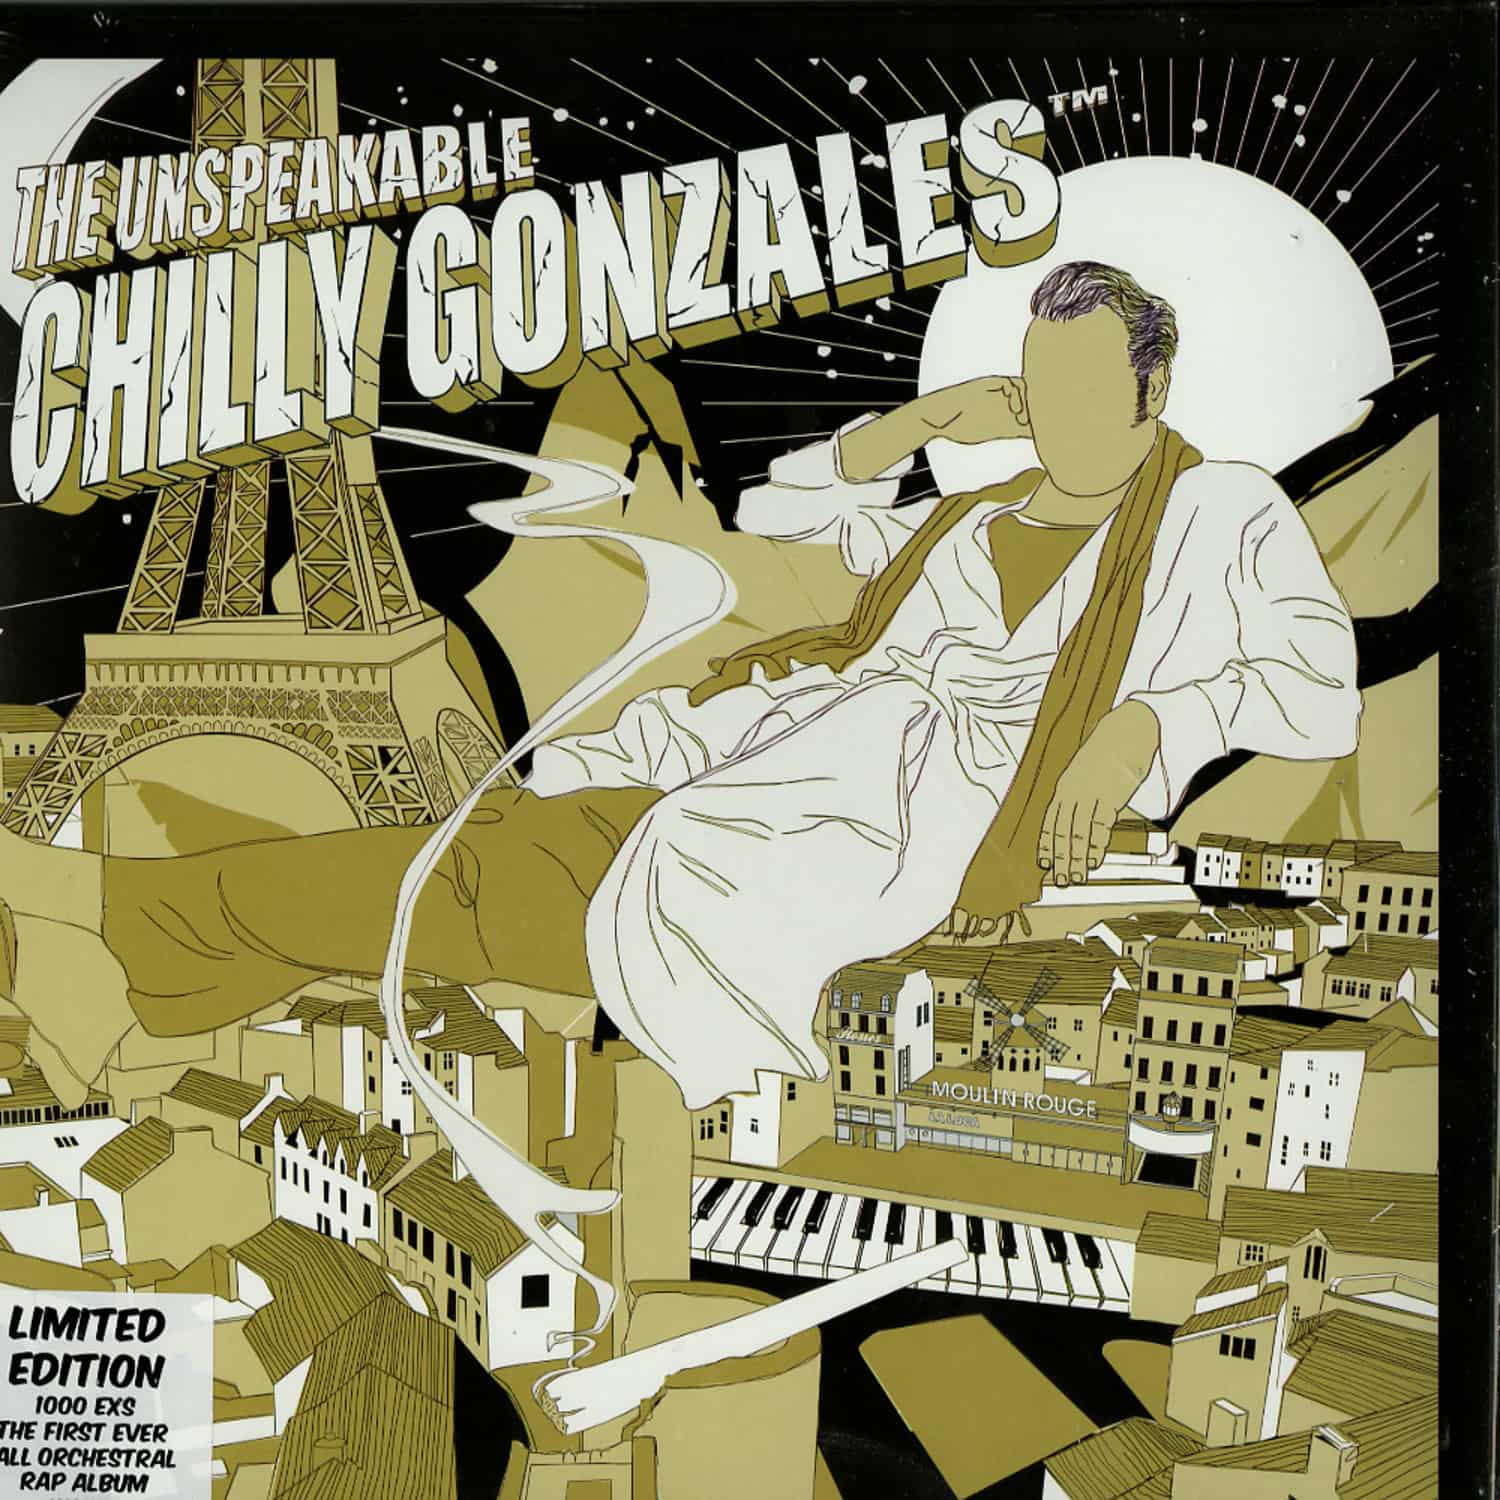 Chilly Gonzales - THE UNSPEAKABLE 